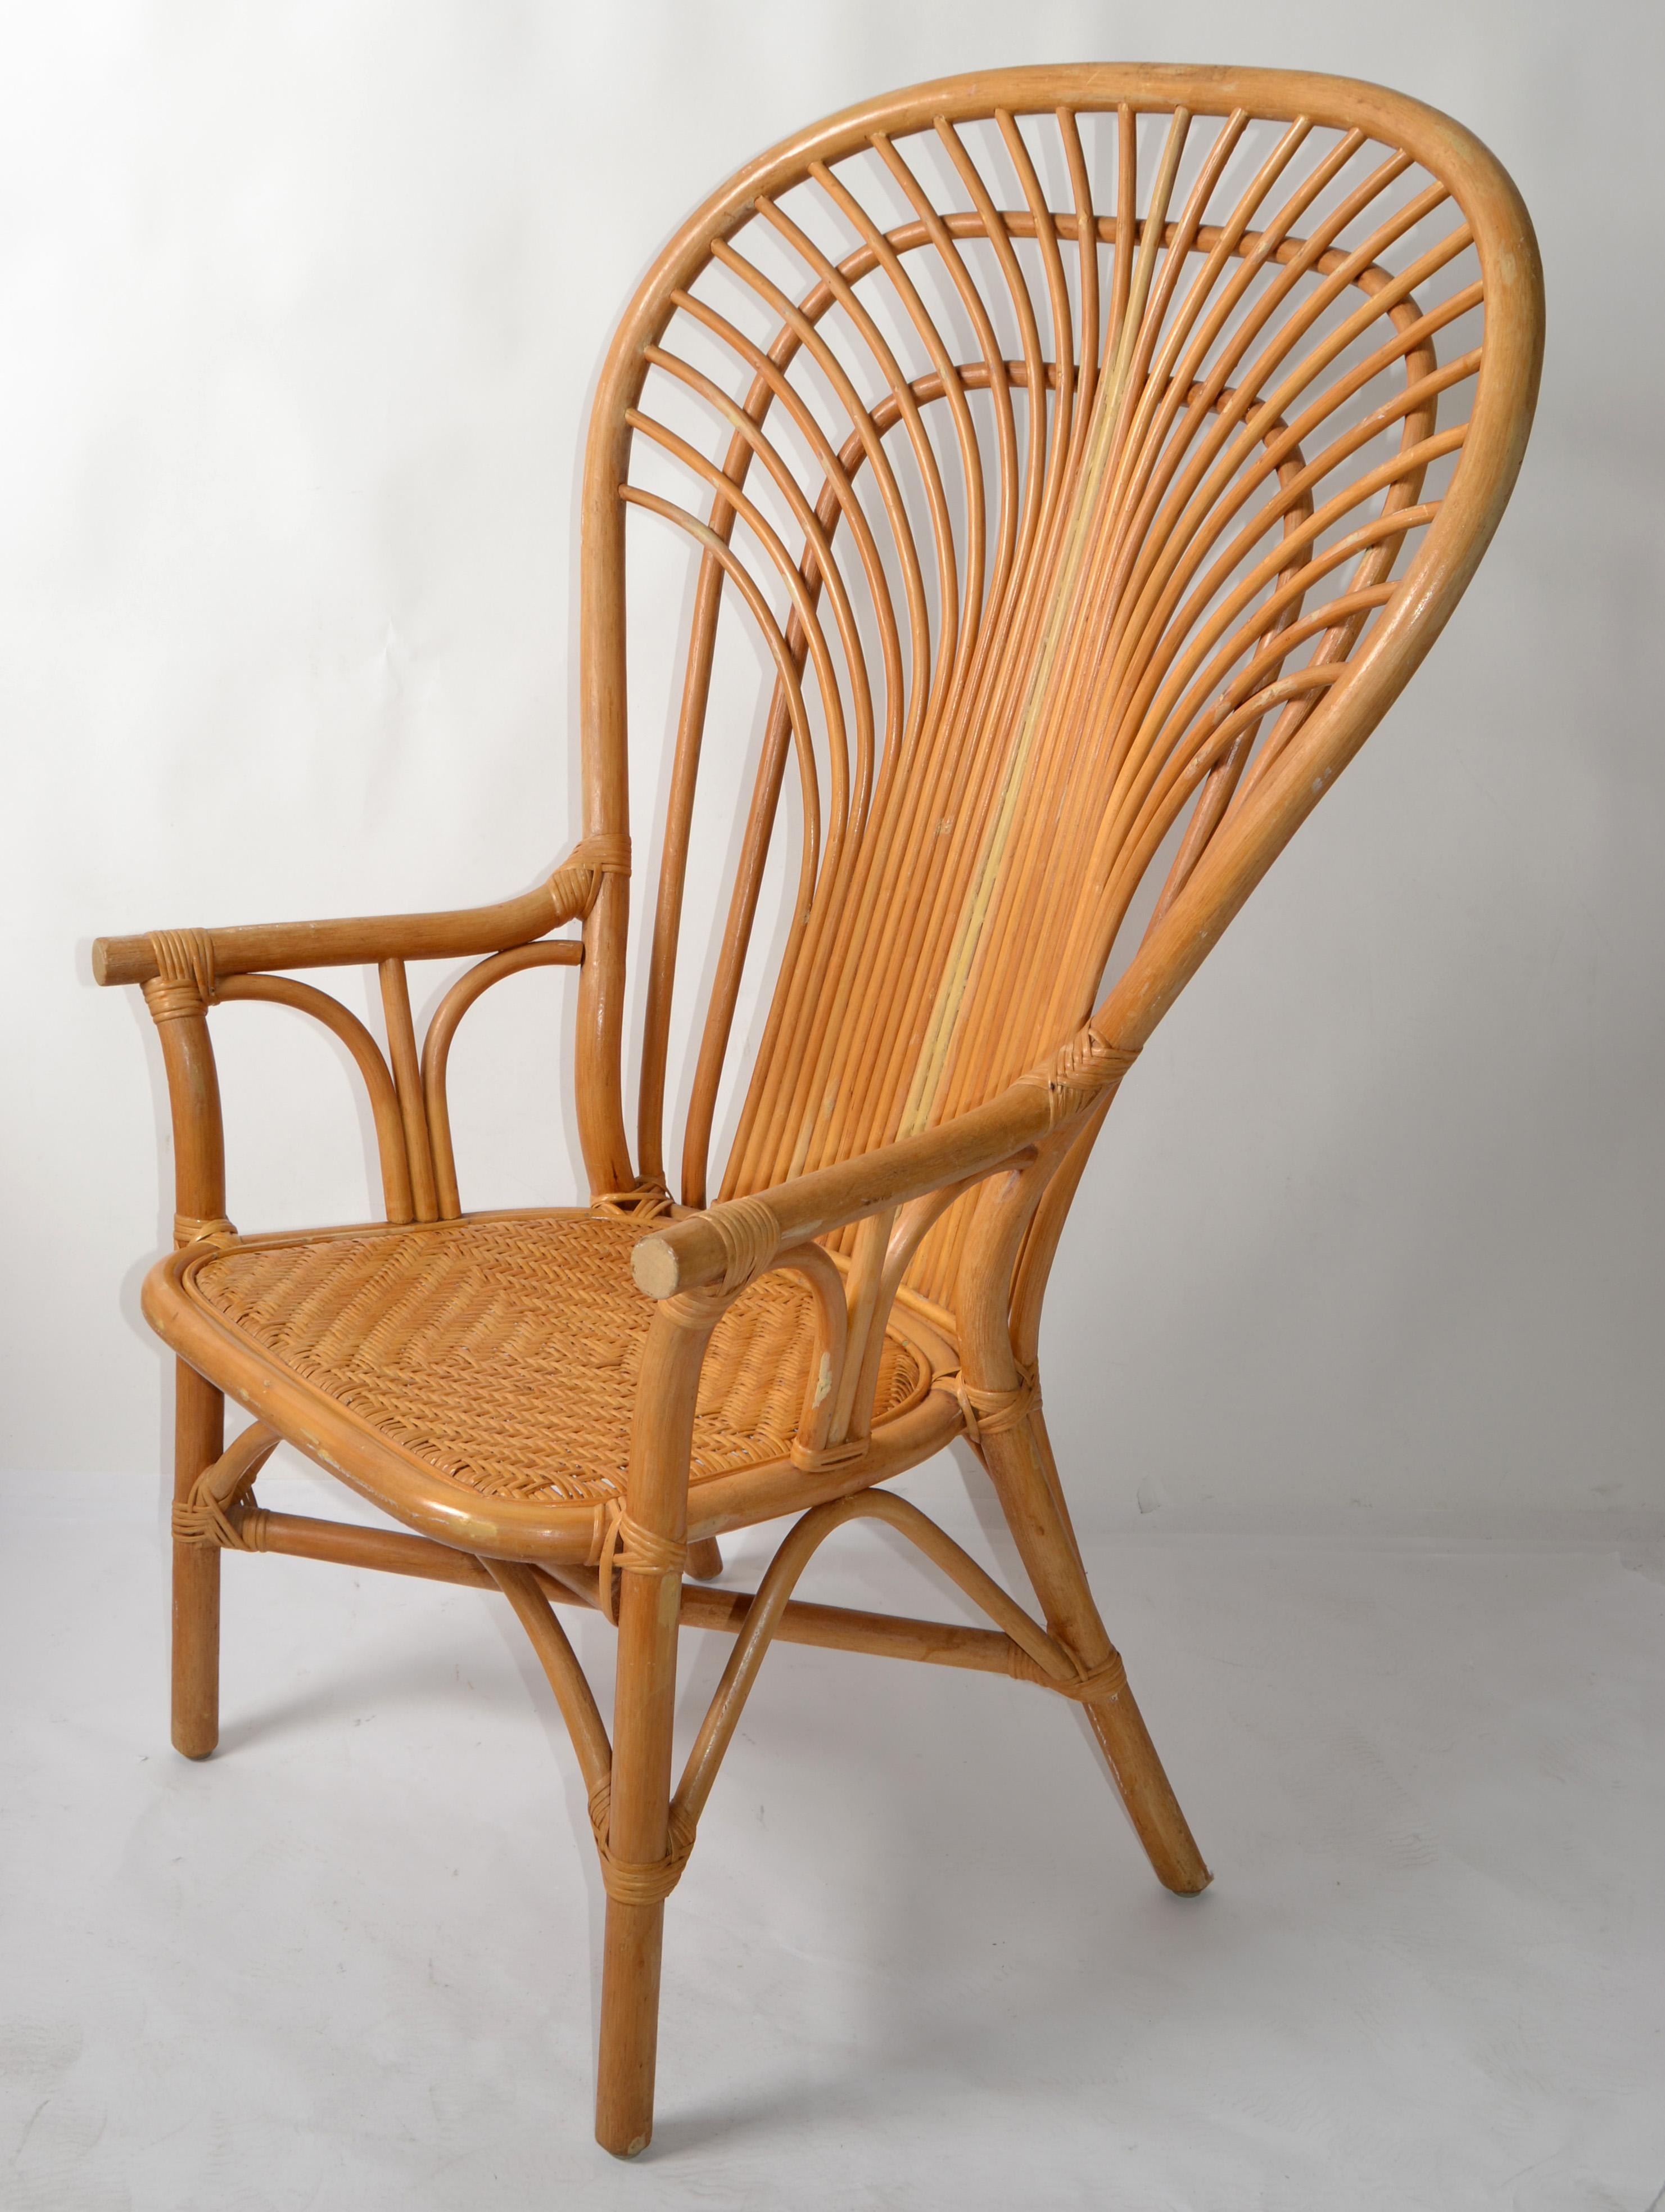 Bohemian Vintage Handcrafted Beige Bamboo Split Reed Caning Rattan Peacock Chair For Sale 5